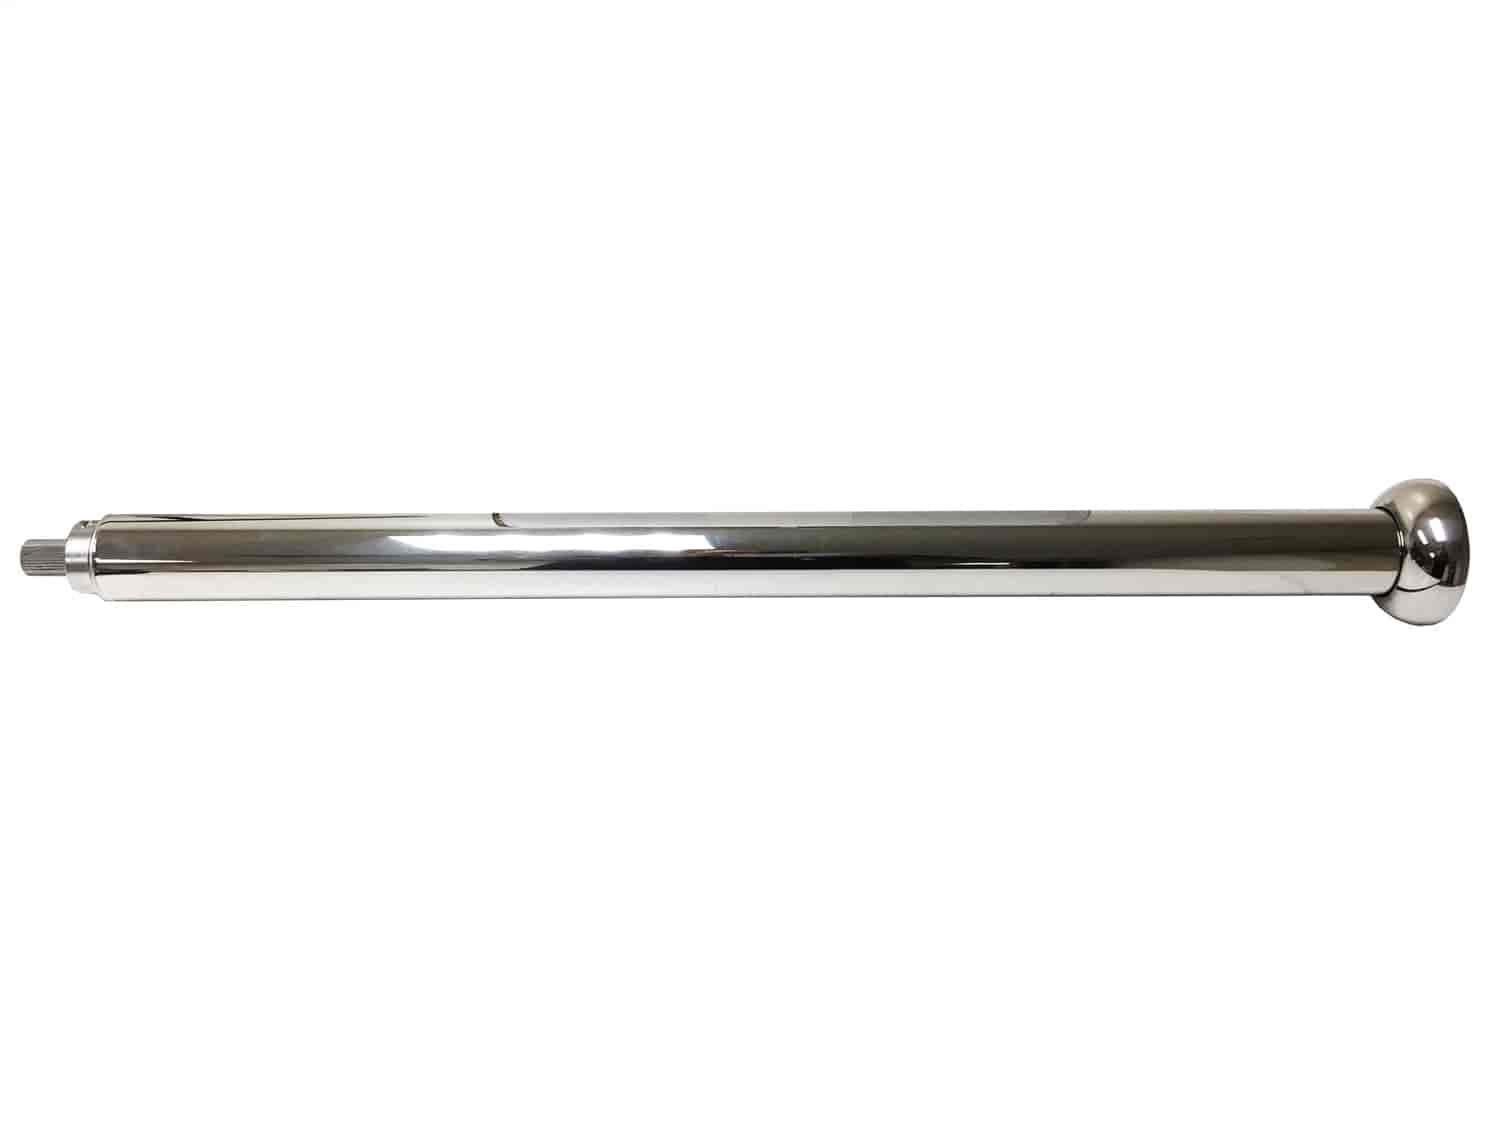 Hot Rod Steering Column 32 in. Length, Polished